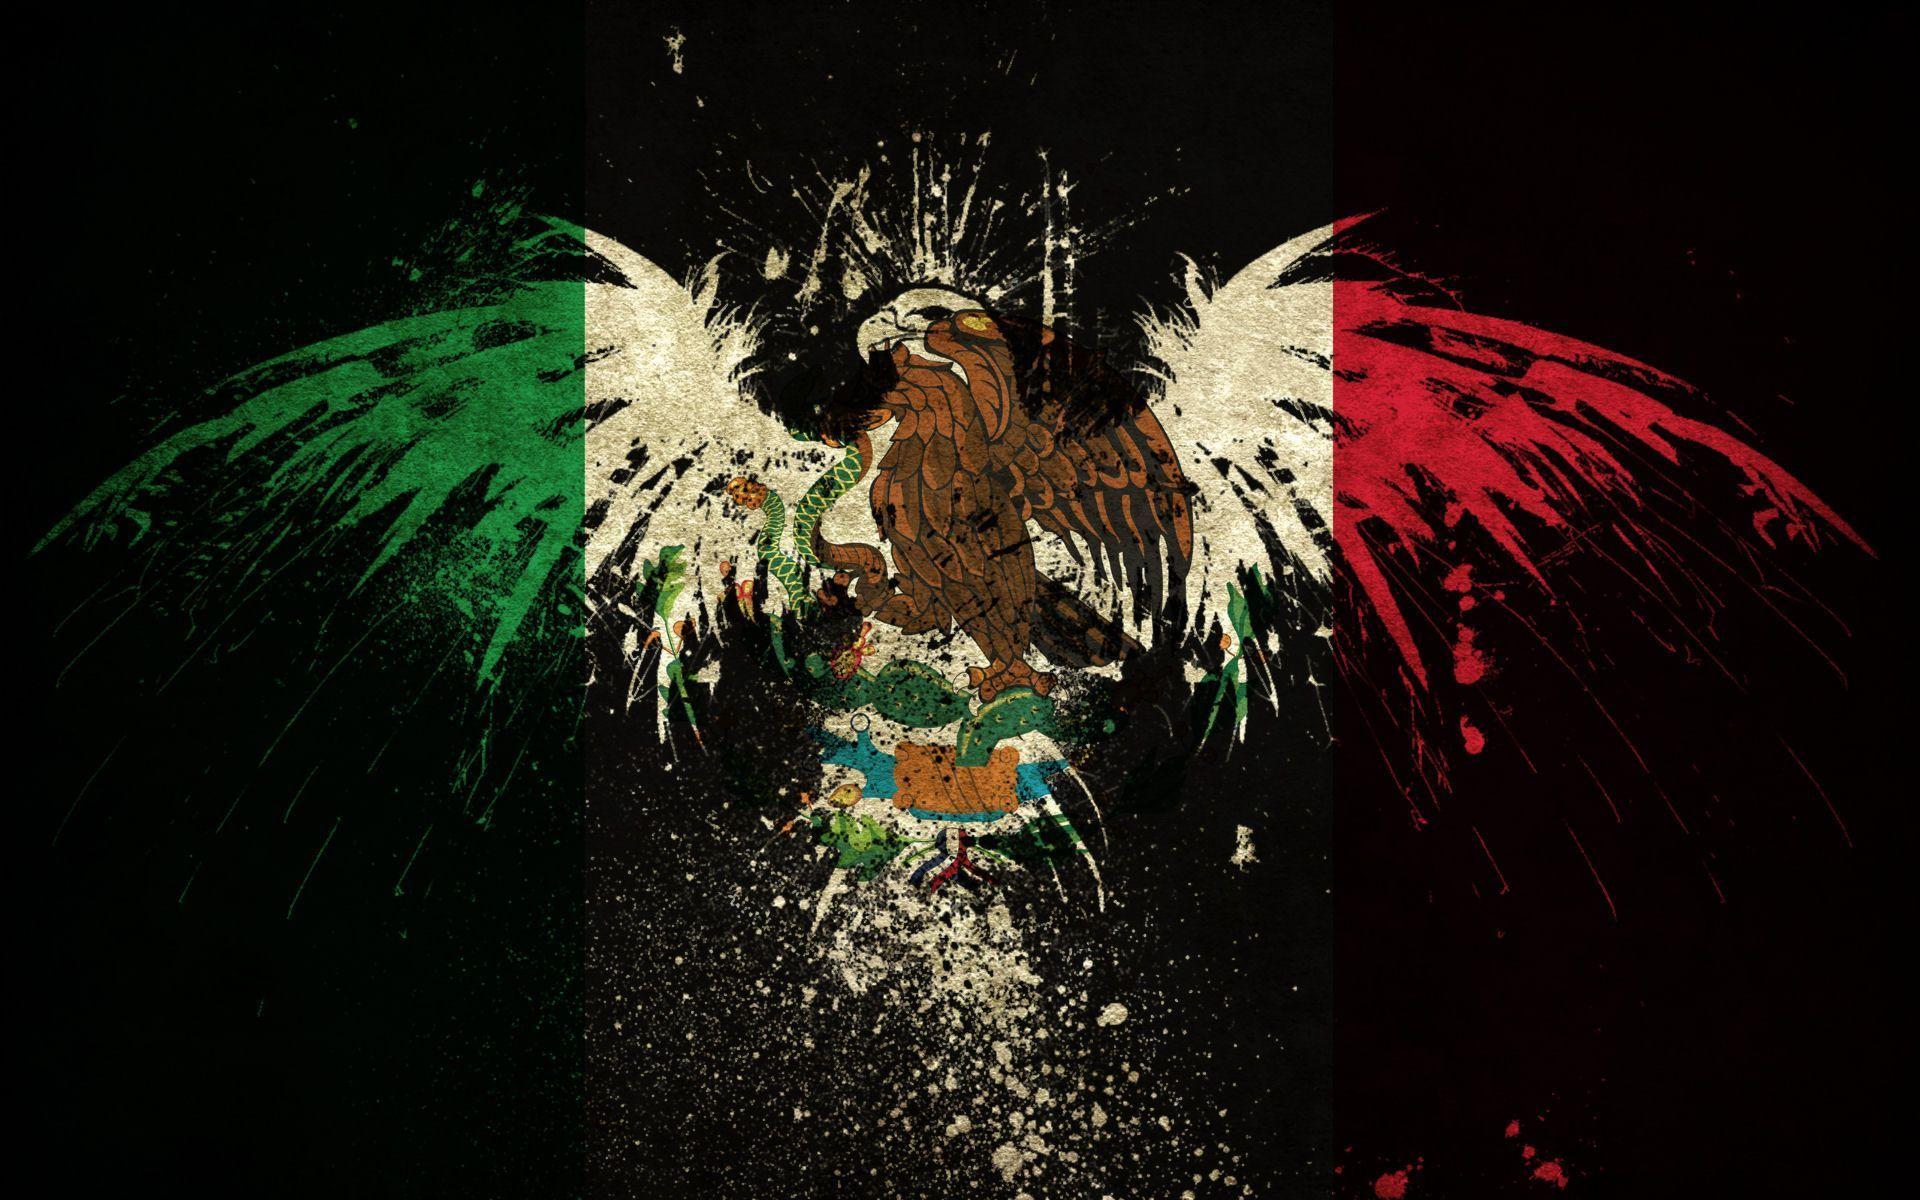 The Mexican Wallpaper. Mexican Skeleton